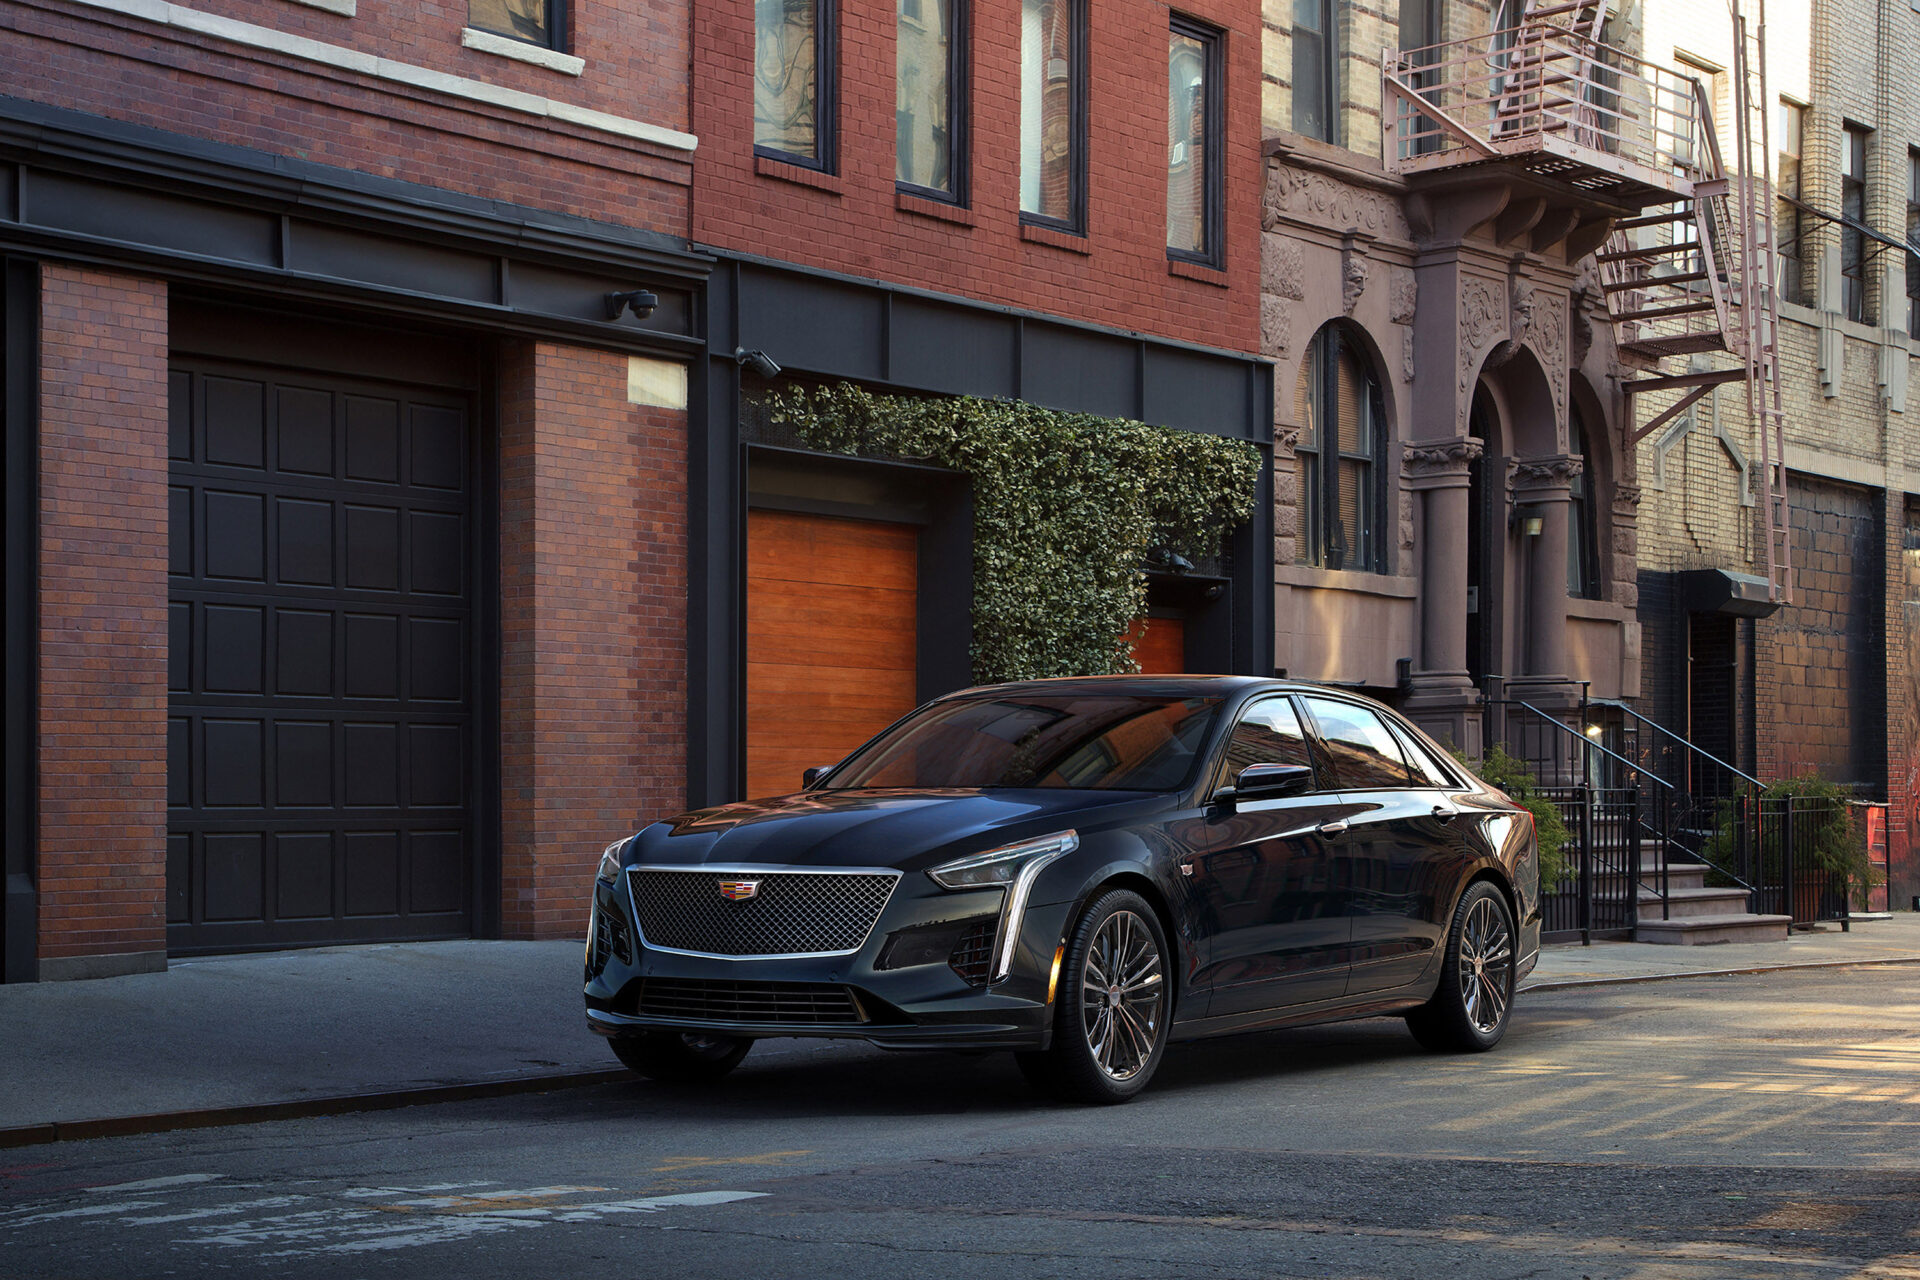 Cadillac introduces the first-ever 2019 CT6 V-Sport, boasting an estimated 550-horsepower twin-turbo V-8 and design language inspired by the Escala Concept.